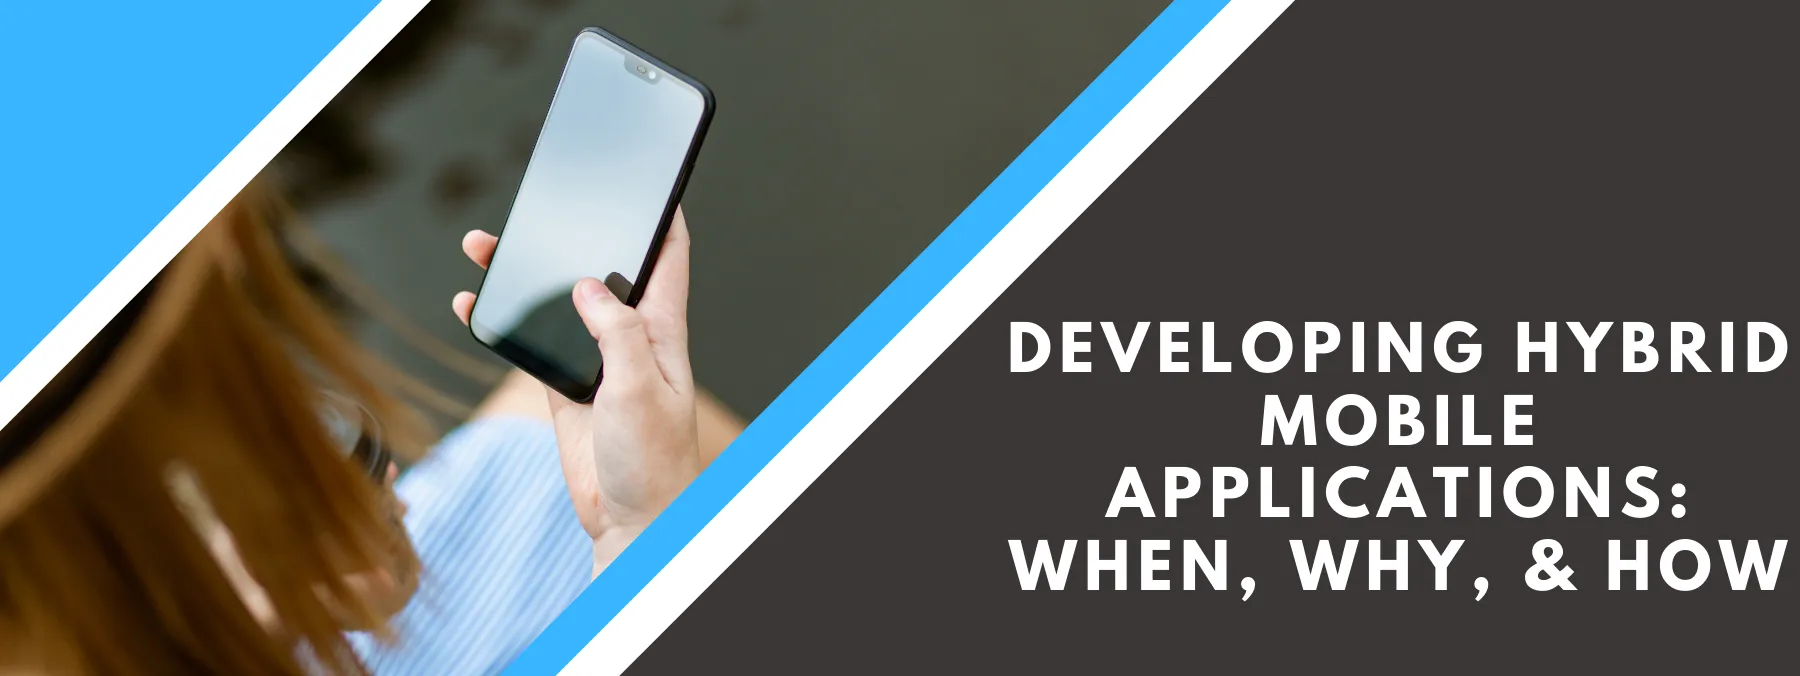 Hybrid Mobile Application Development: When, Why, and How?